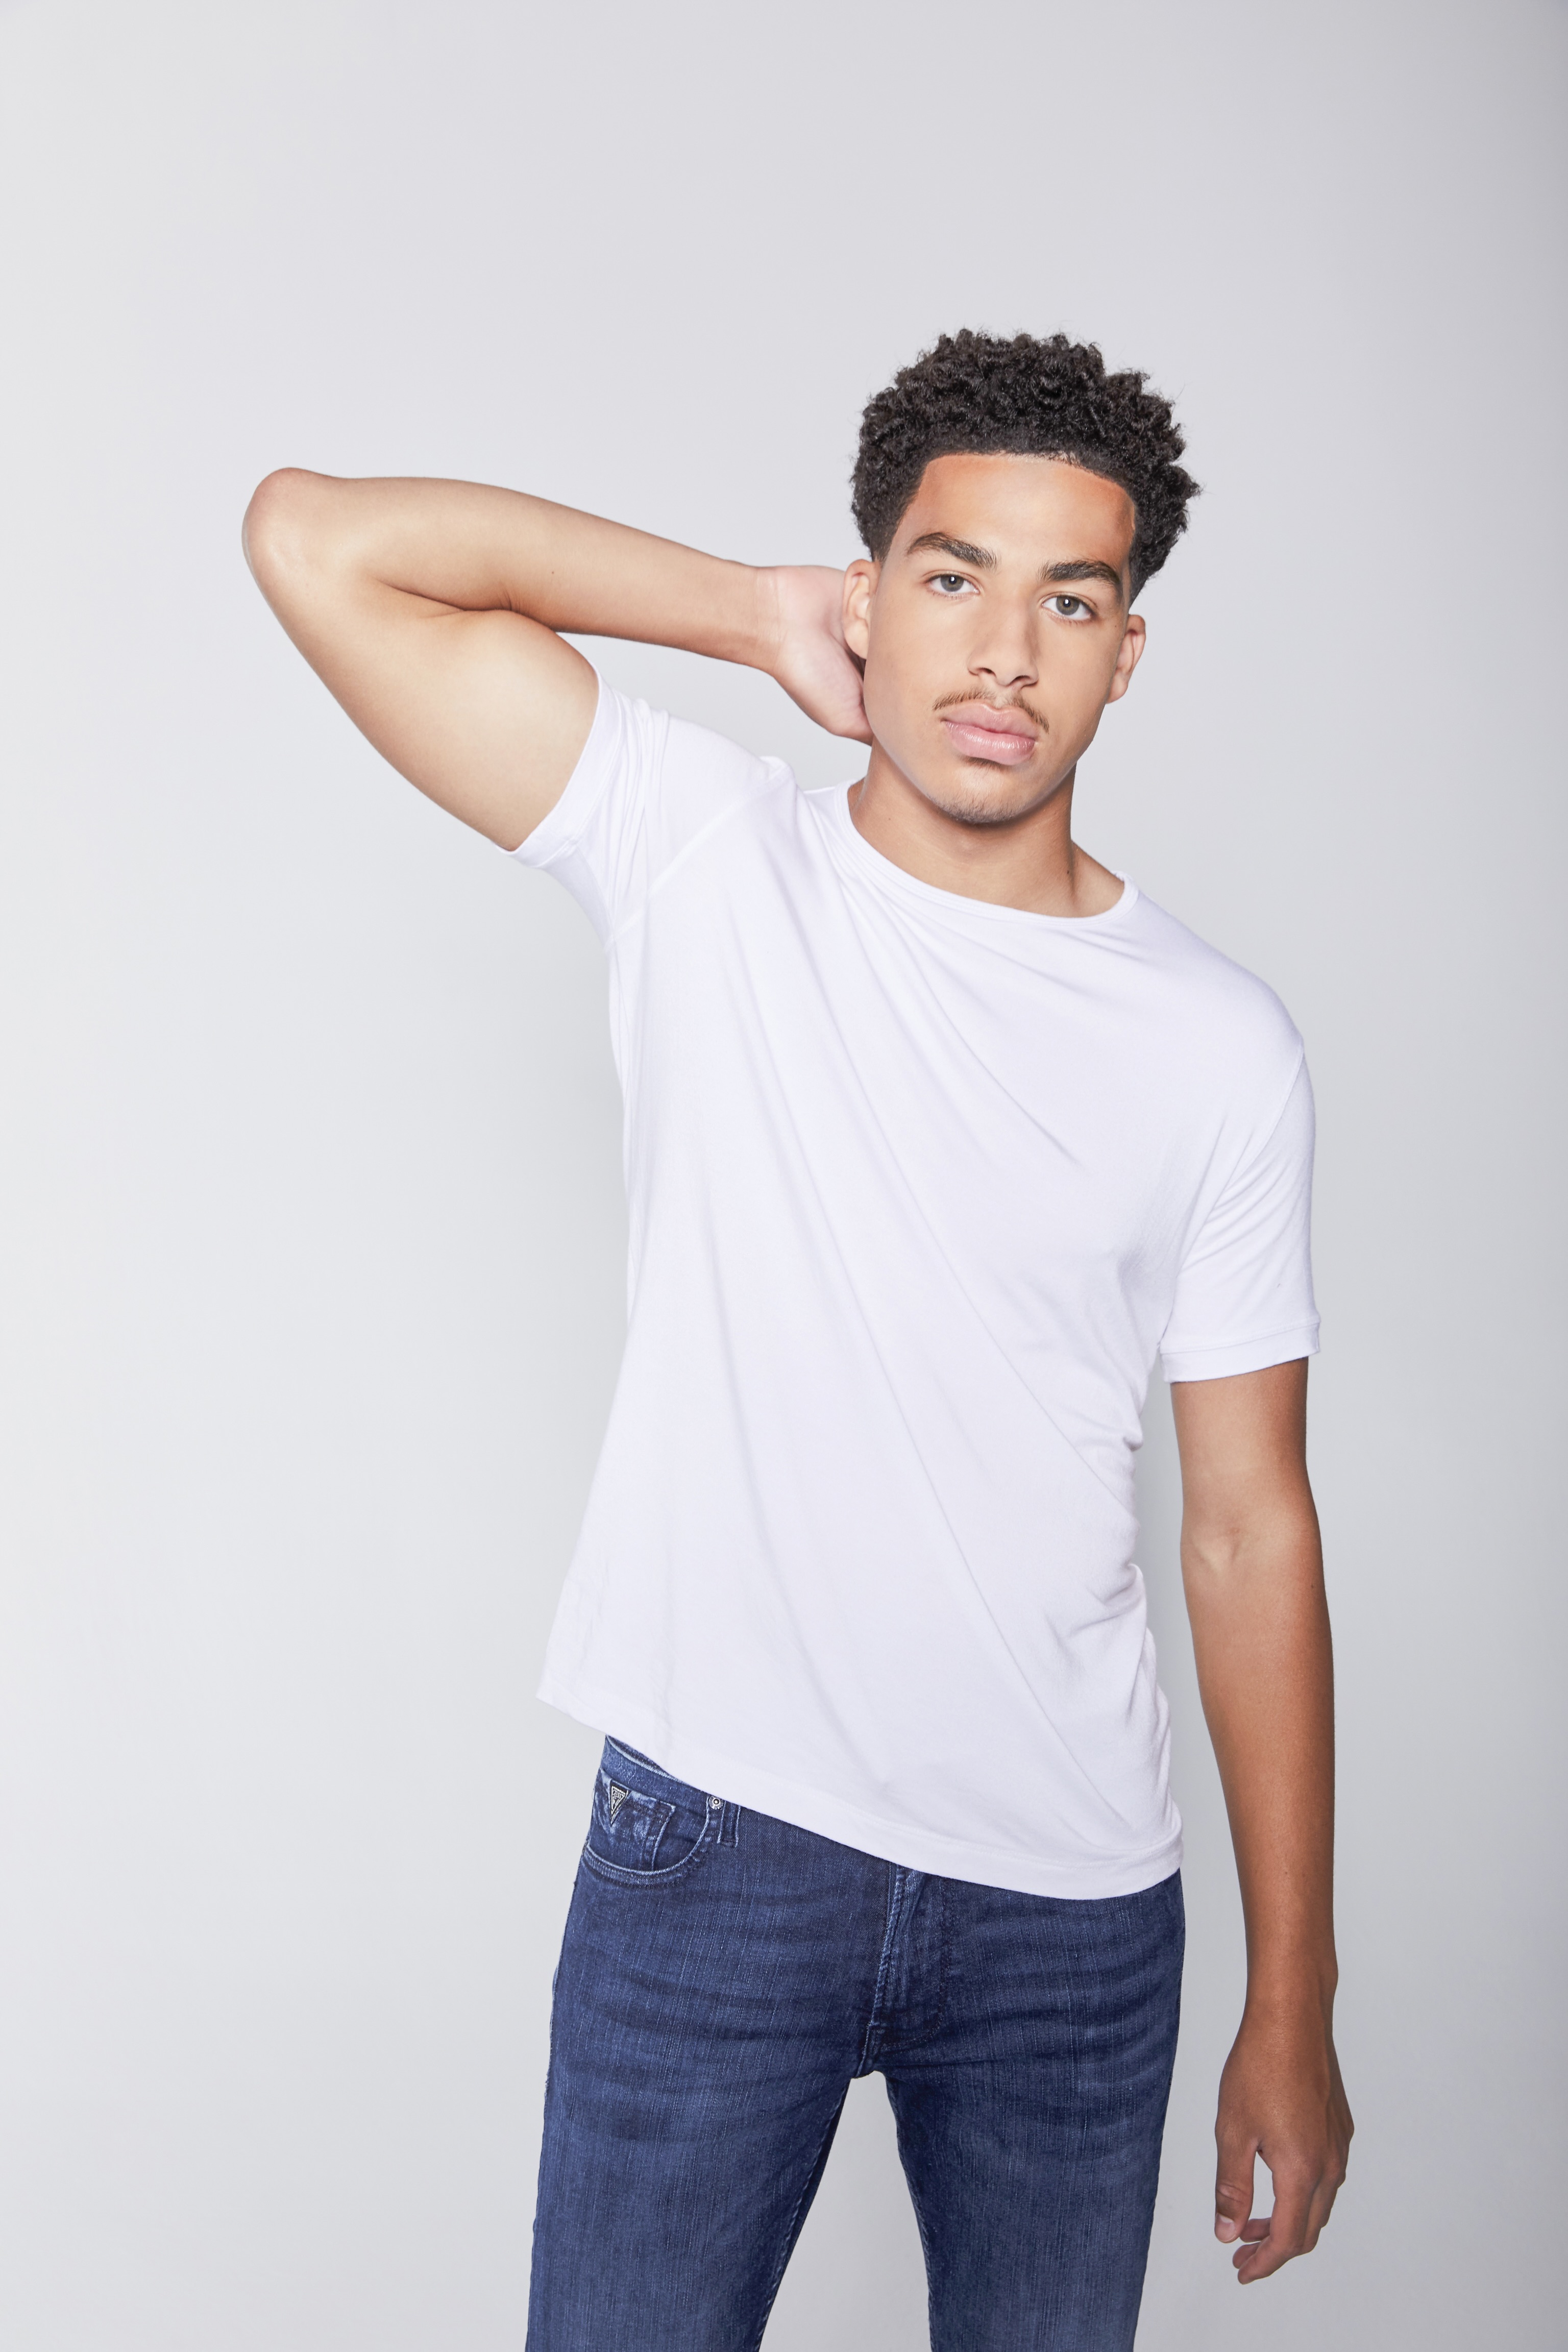 Picture of Marcus Scribner in General Pictures - marcus-scribner ...